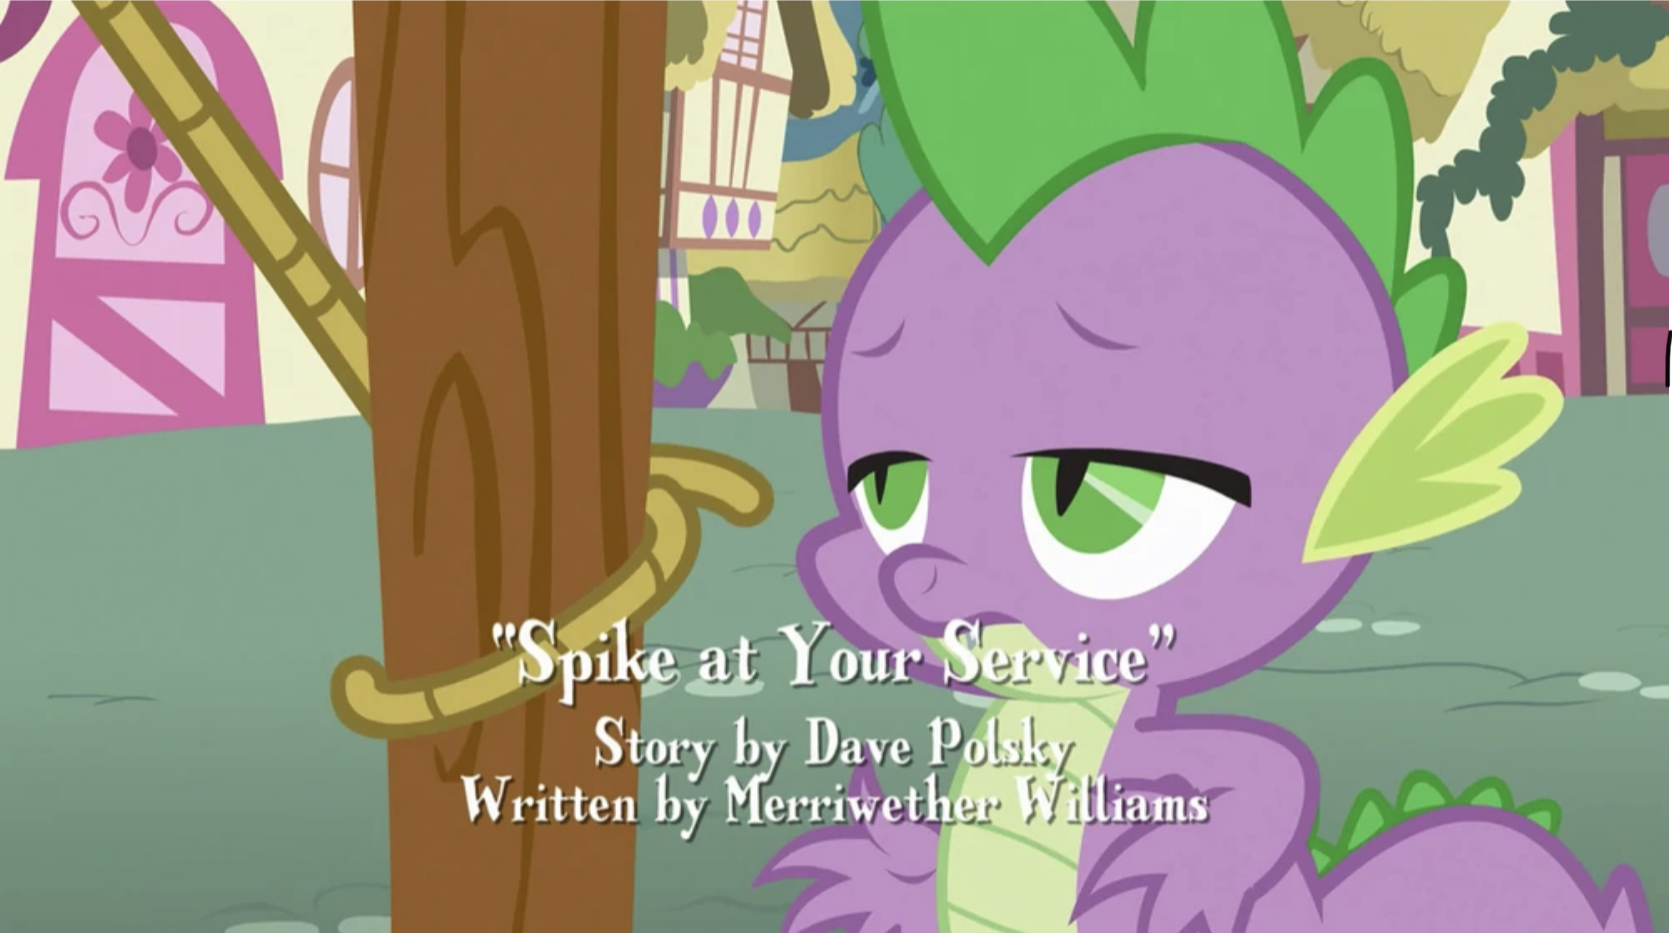 Spike at Your Service Script First Draft - My Little Pony: Friendship Is Magic "Spike at your Service" (lost production materials for alternate version of animated fantasy series episode; 2012)